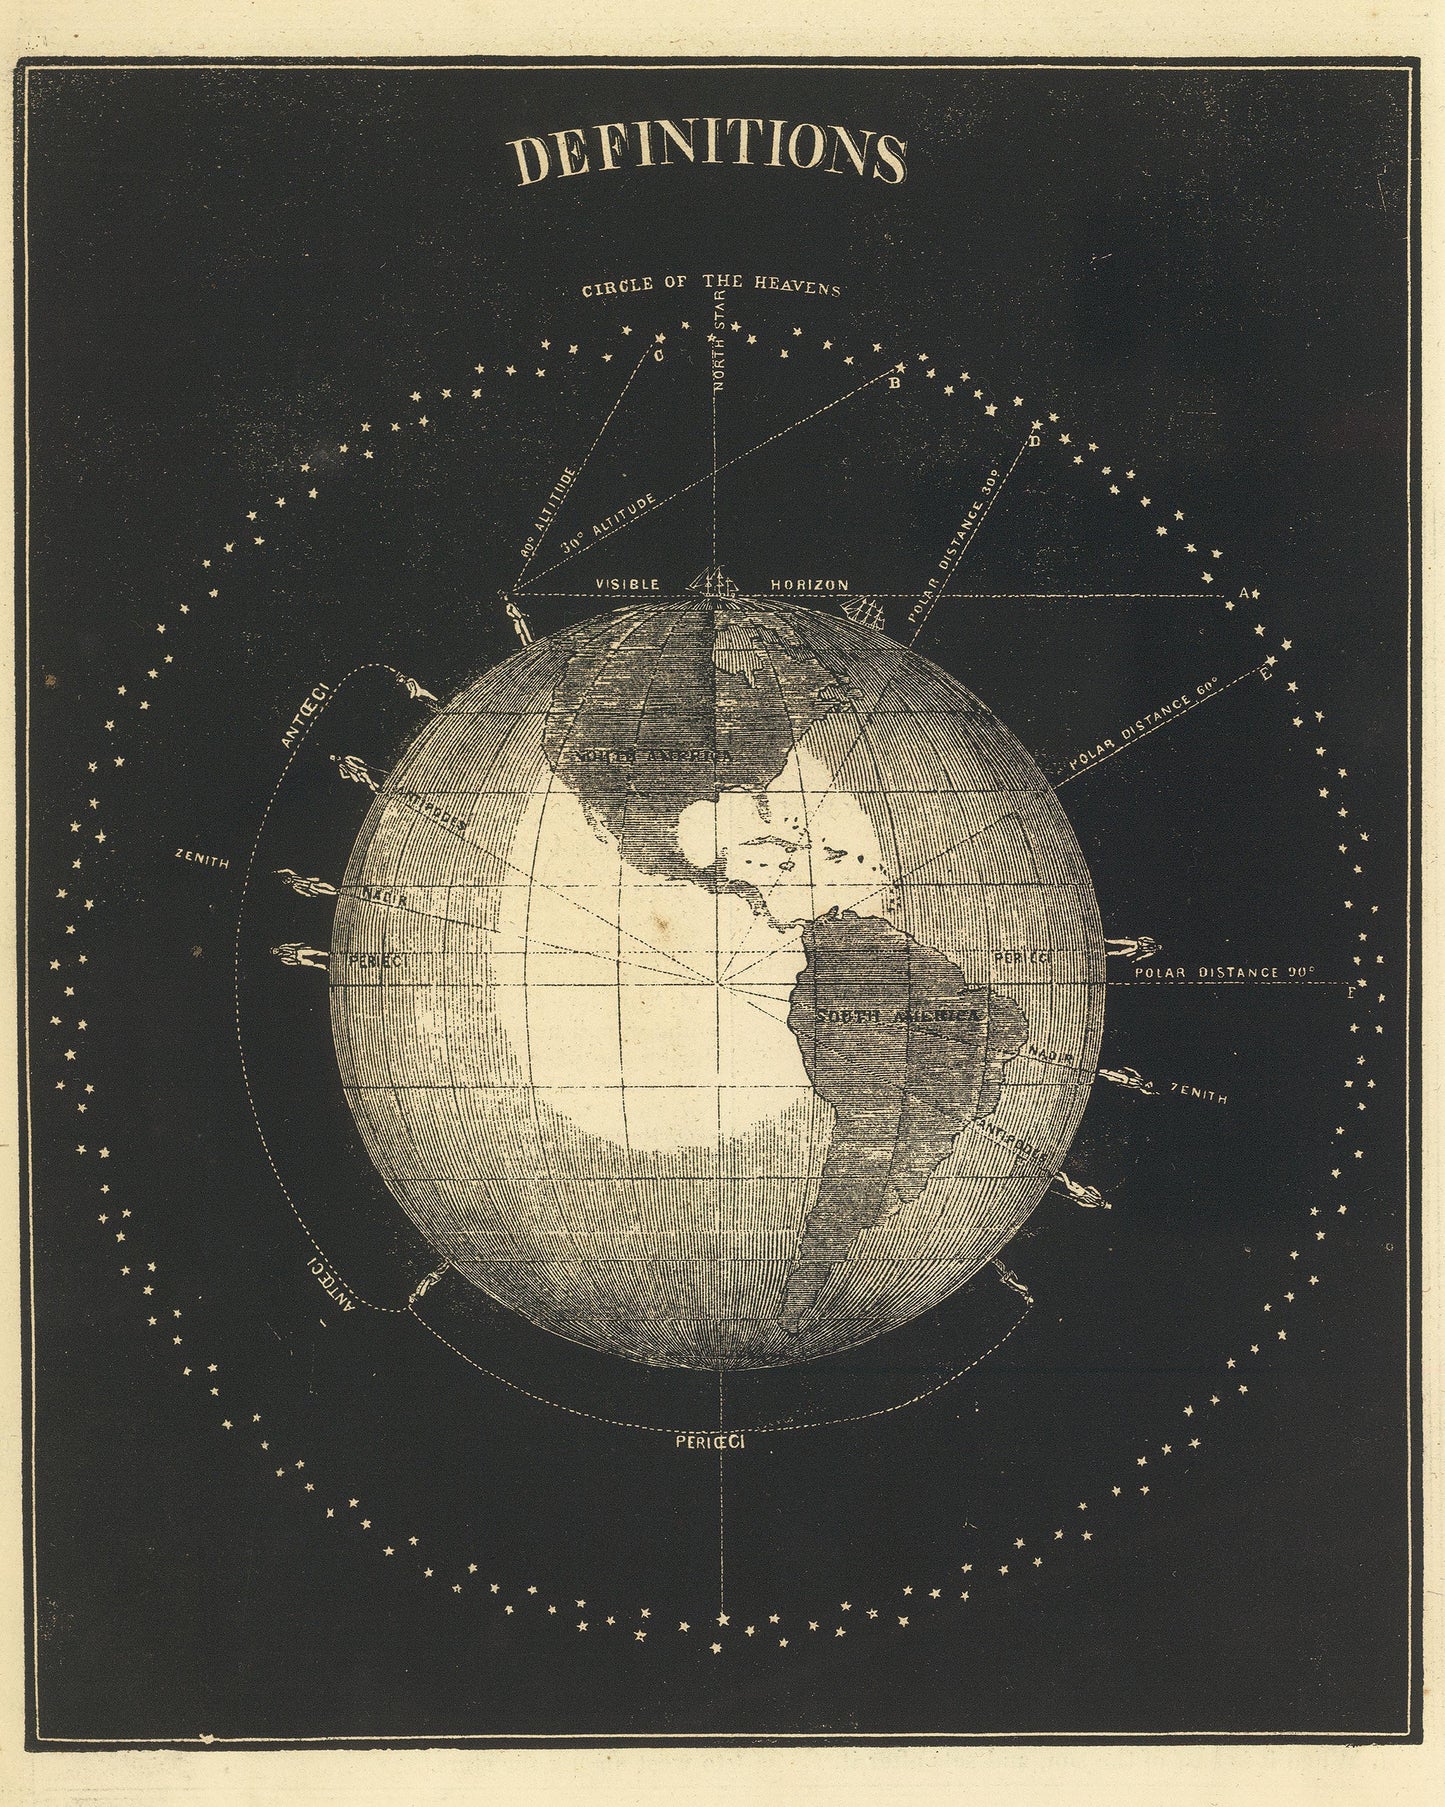 Definitions from Smith's Illustrated Astronomy by Asa Smith, 1849 - Postcard